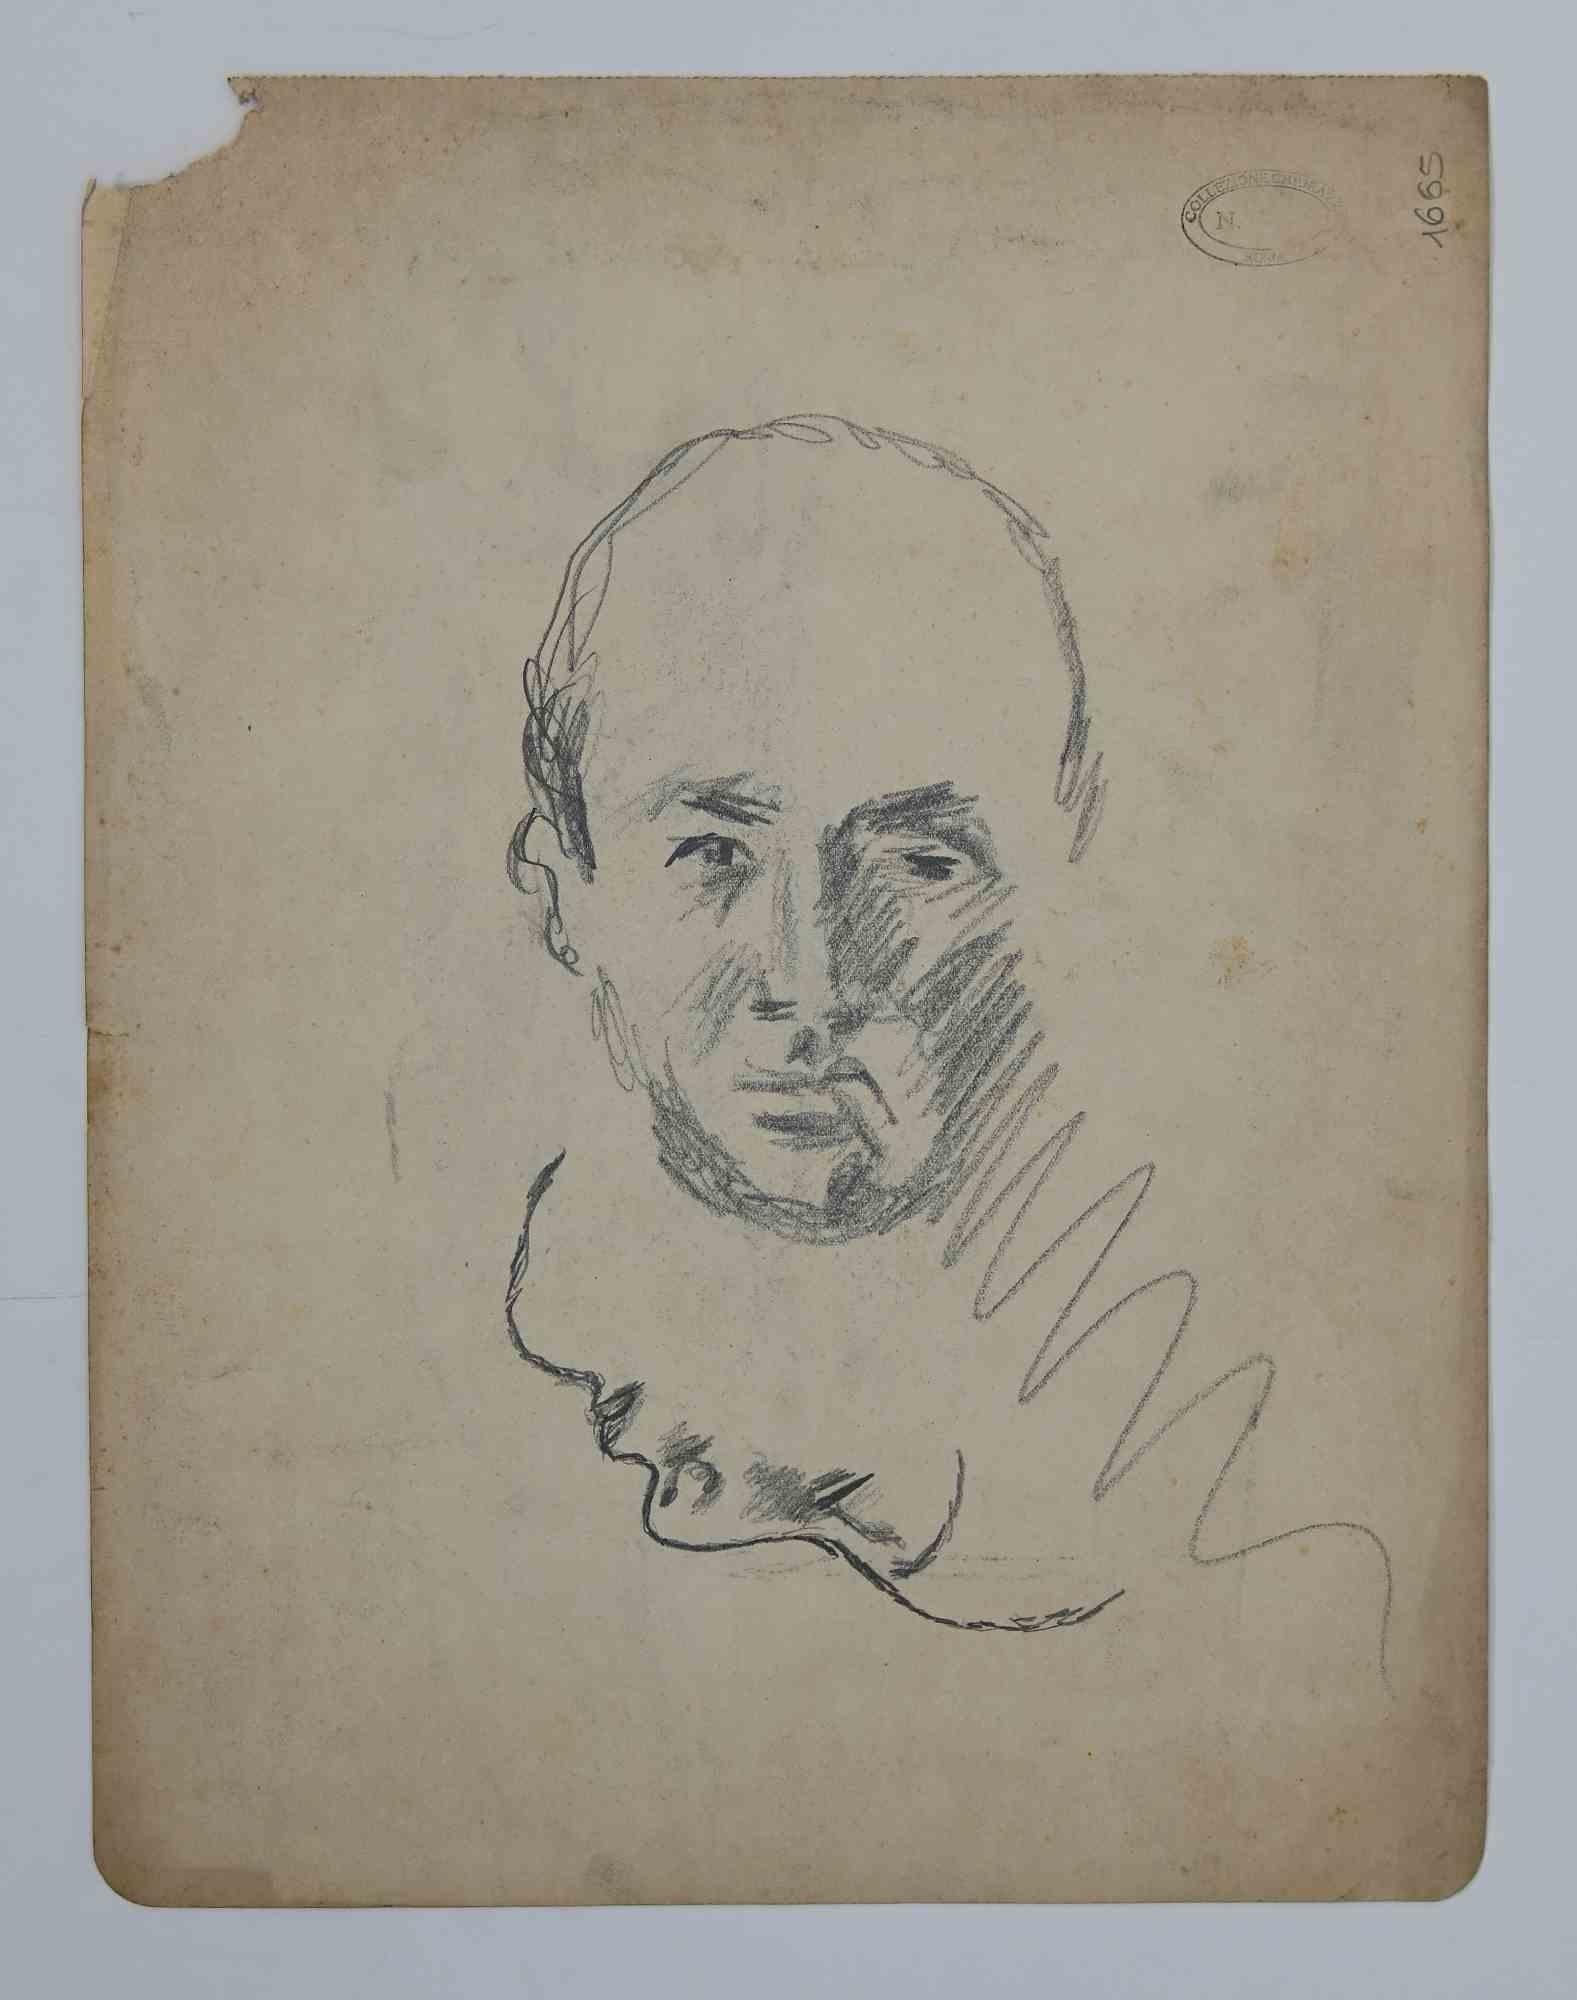 Portraits is an original Pencil Drawing realized by Mino Maccari in mid-20th century.

Good condition on a yellowed paper.

Hand-signed by the artist with pencil, some sketches on the back.

Mino Maccari (1898-1989) was an Italian writer, painter,